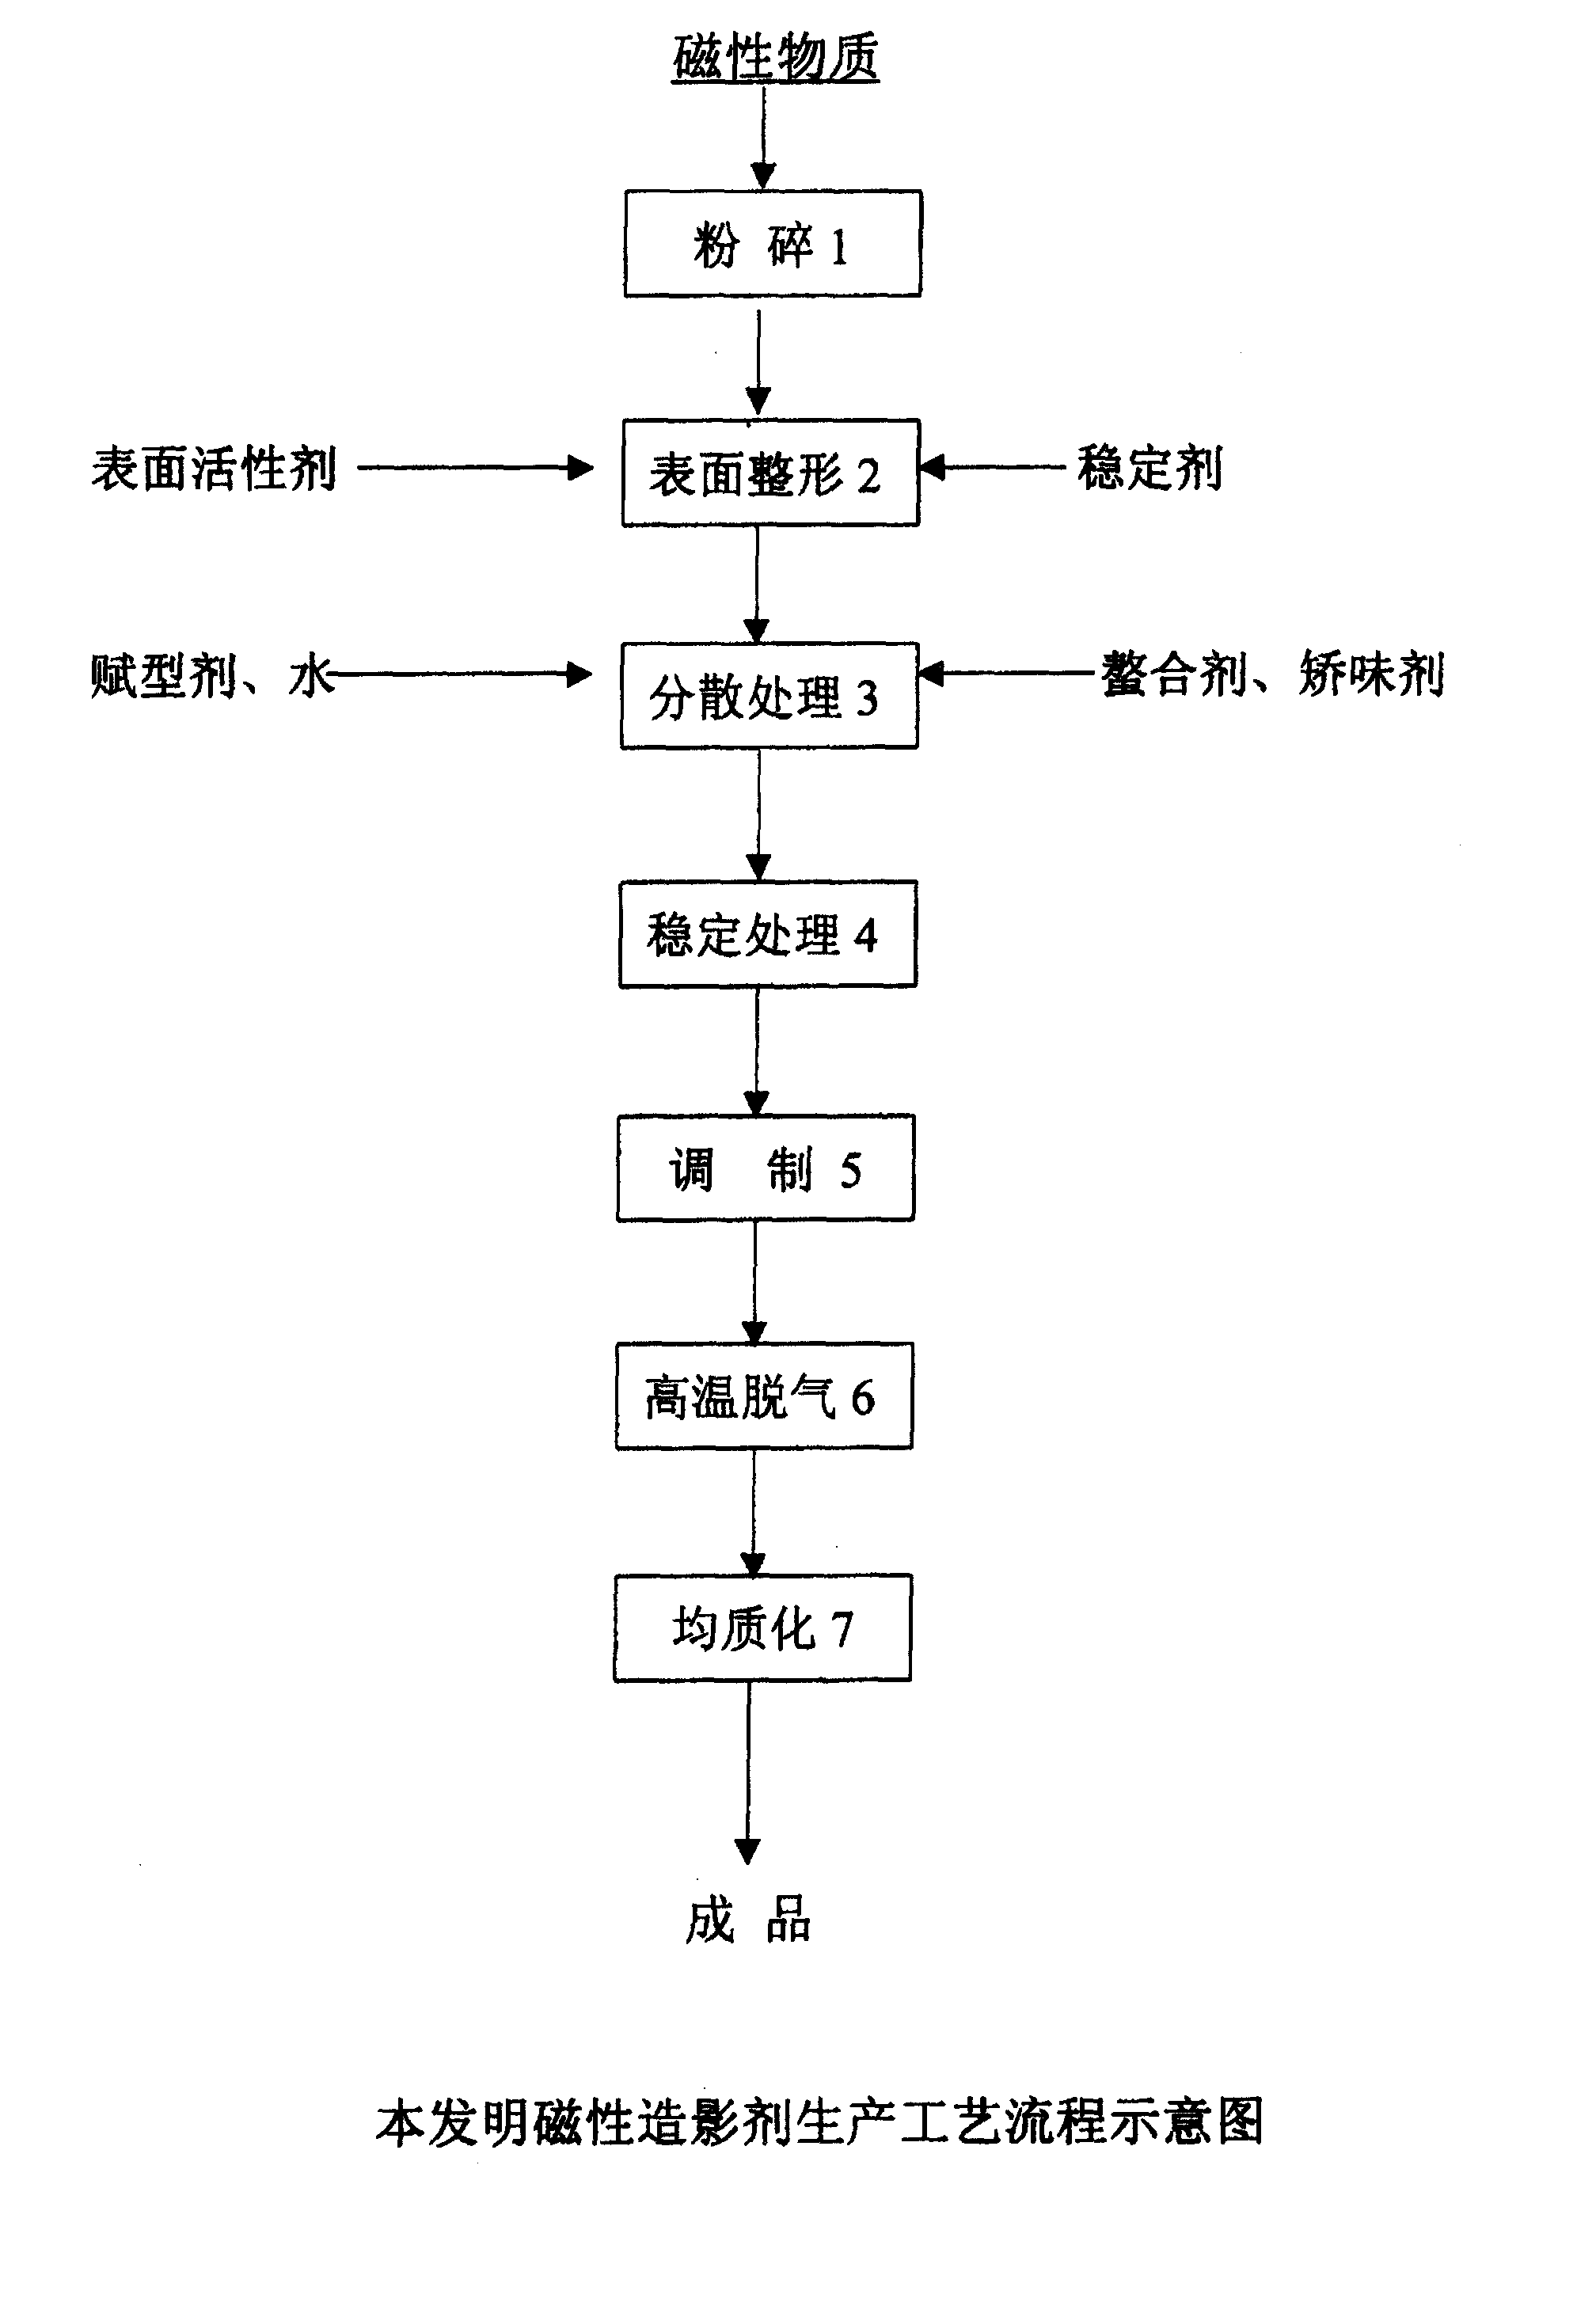 Magnetic contrast medium composition and its preparing method